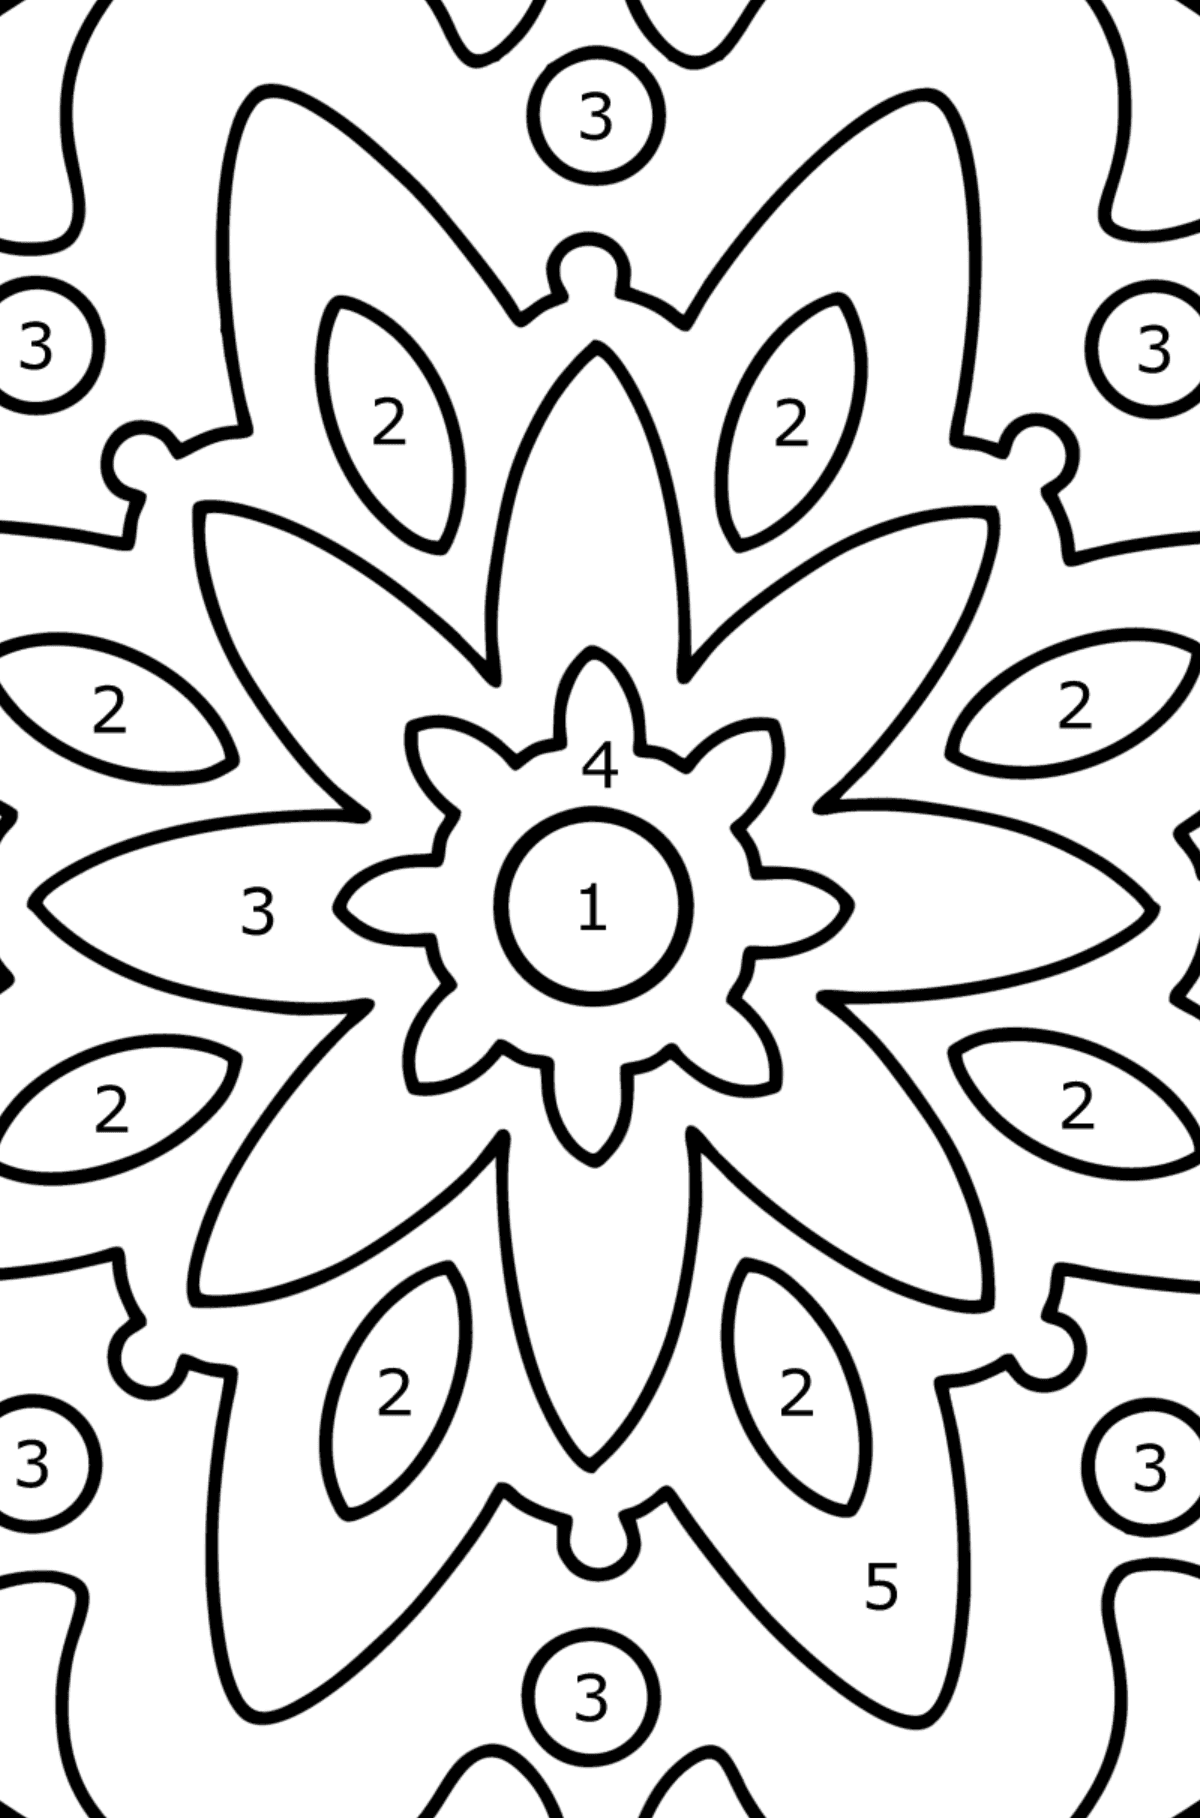 Mandala coloring page - 22 elements - Coloring by Numbers for Kids